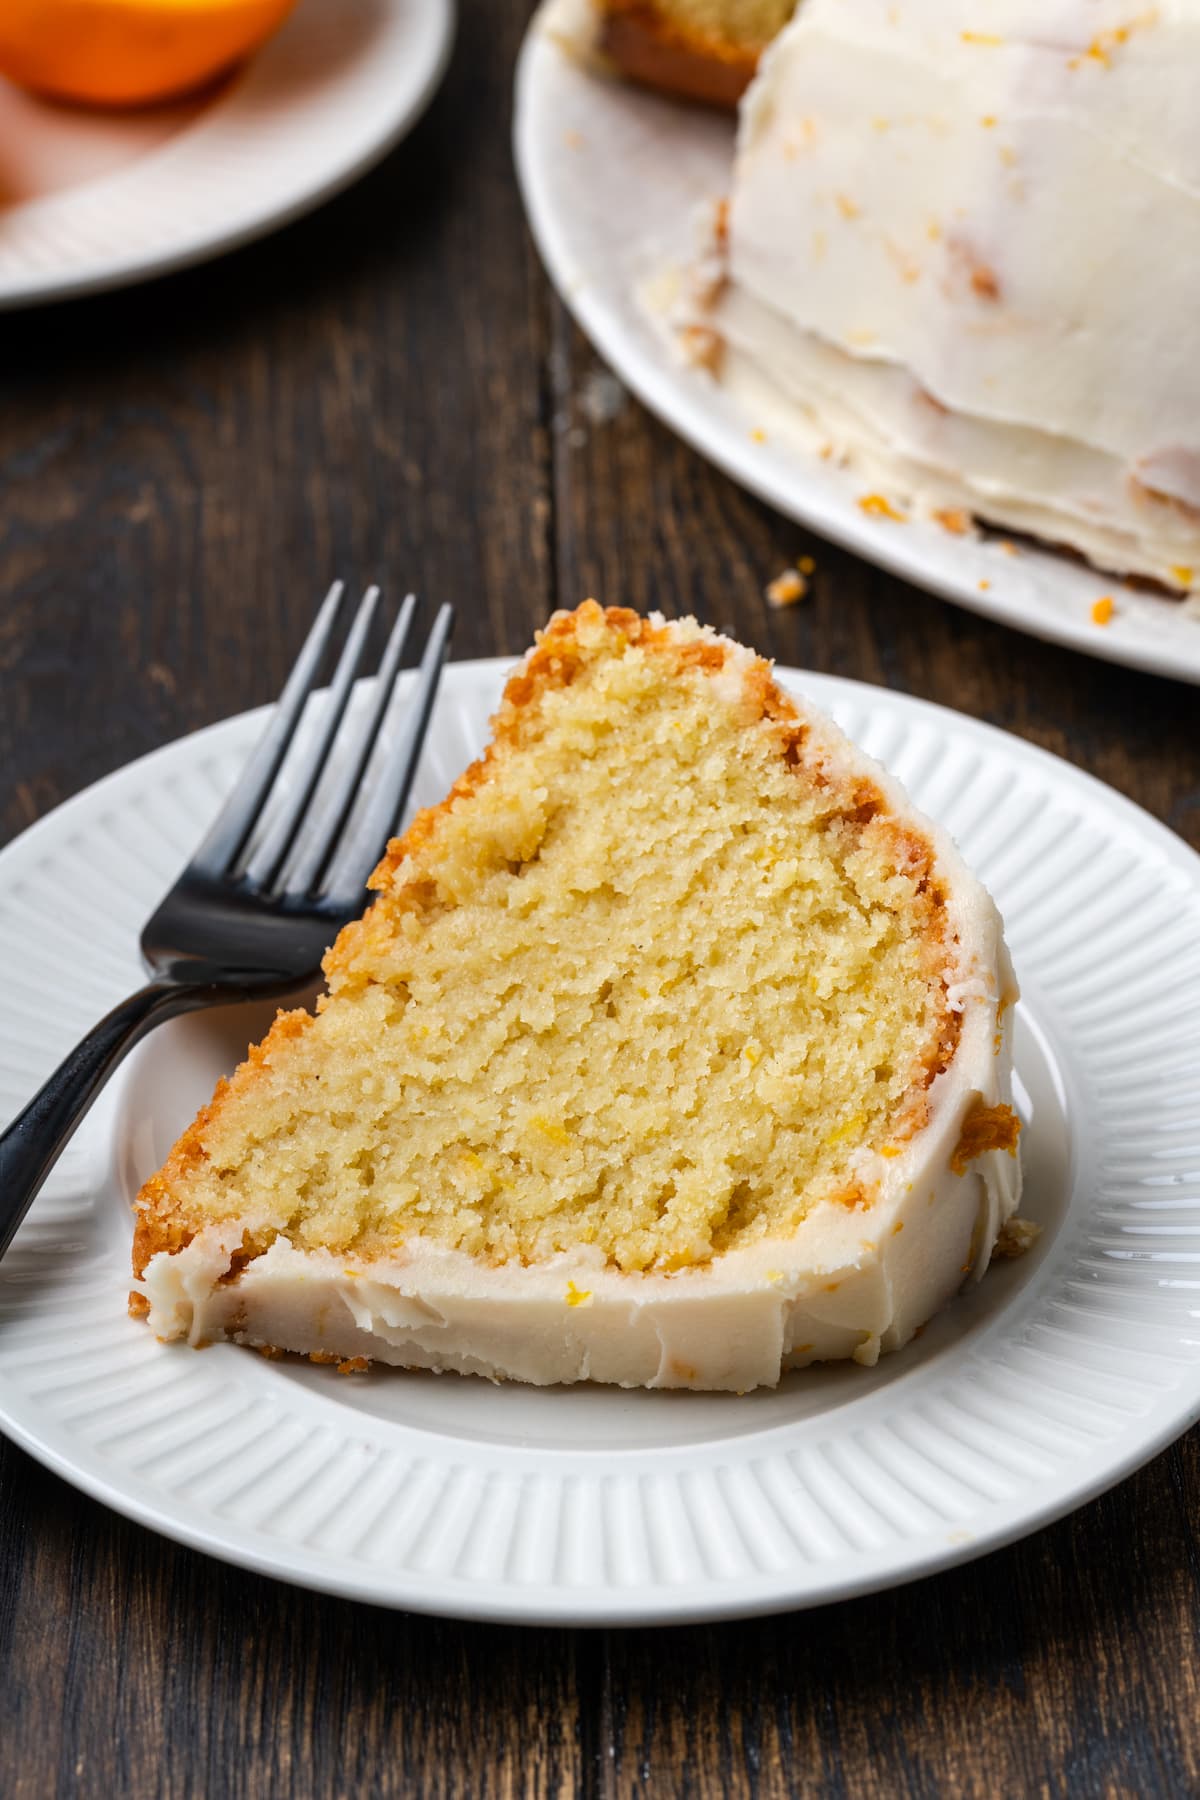 A slice of Meyer lemon bundt cake on a white plate next to a fork, with a corner of the rest of the cake in the background.